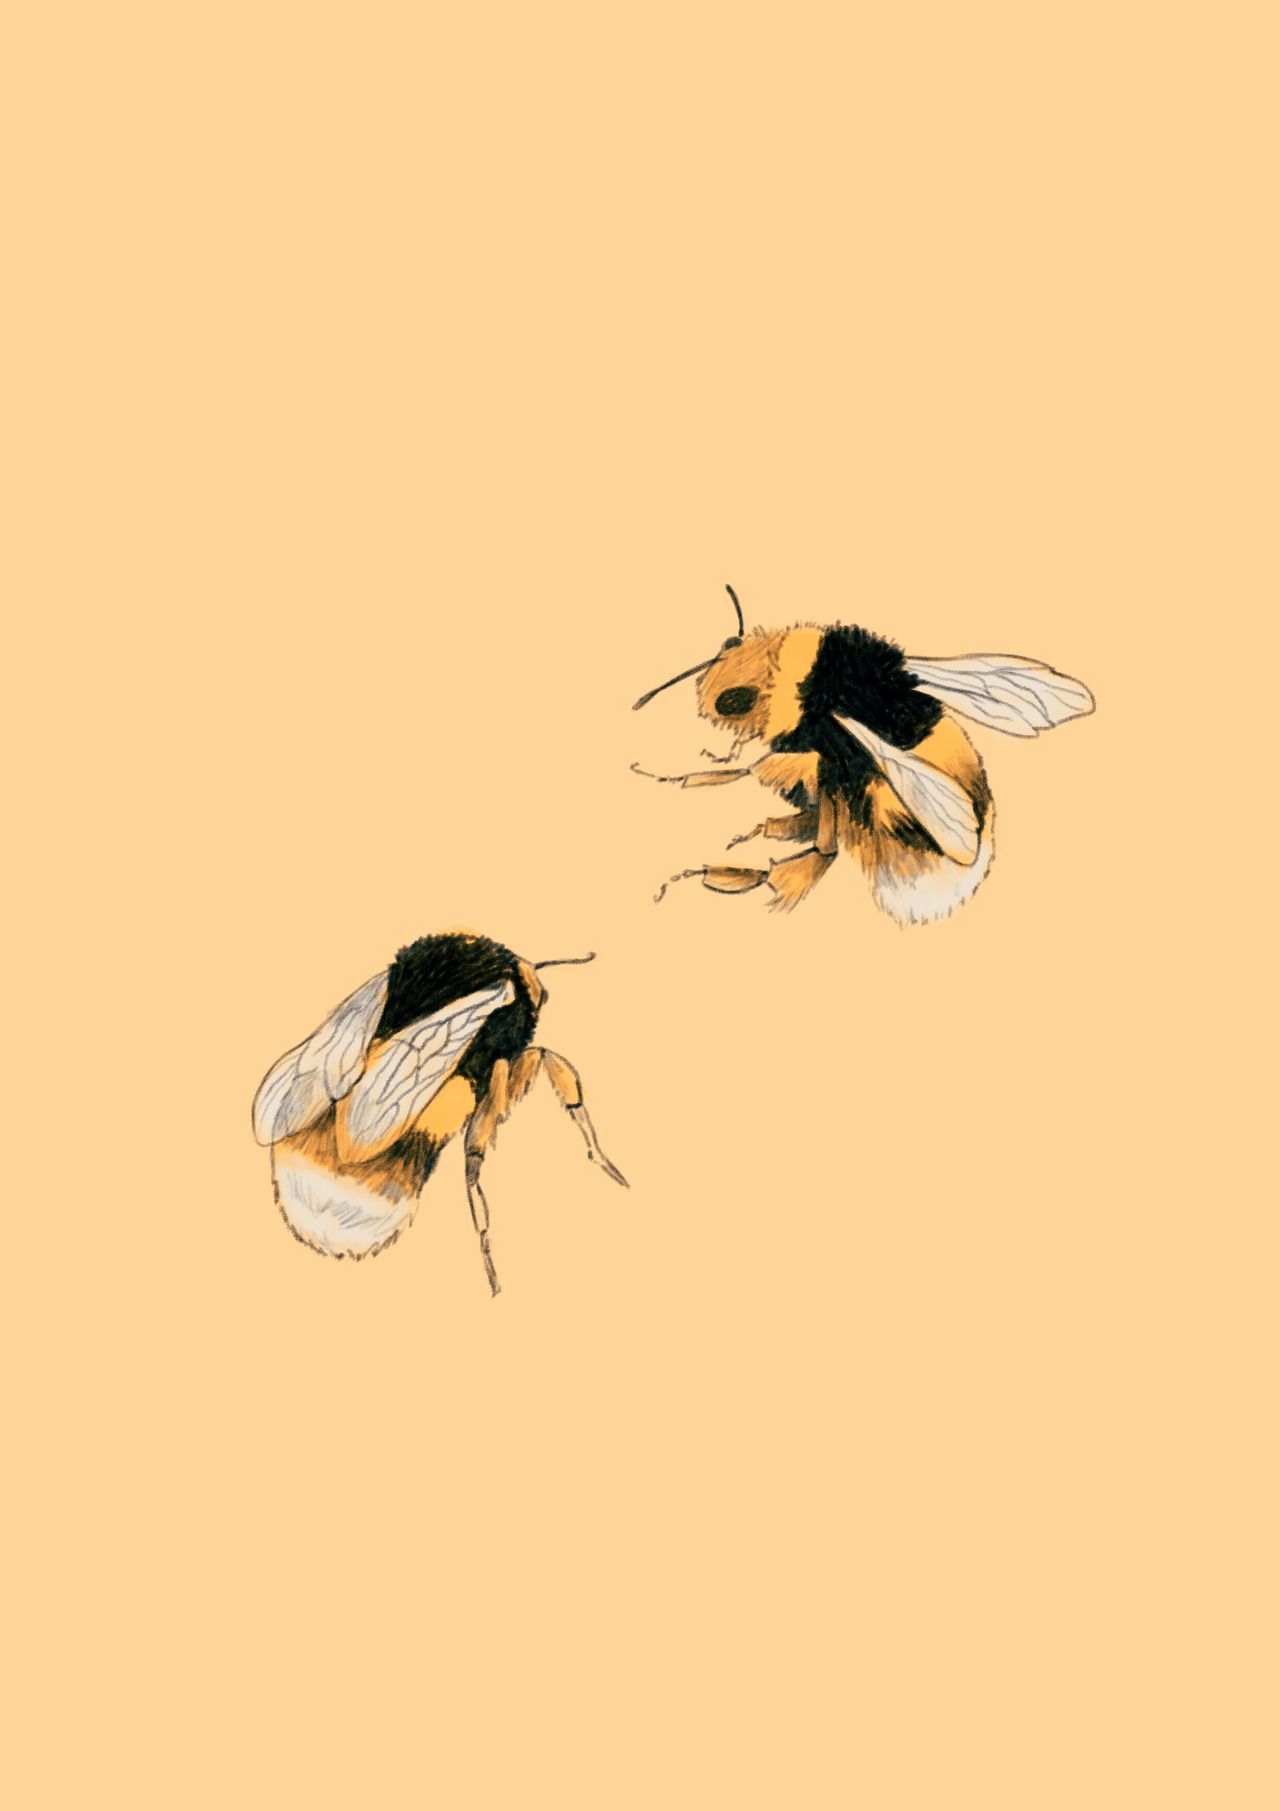 Two bees flying in the air on a yellow background - Bee, profile picture